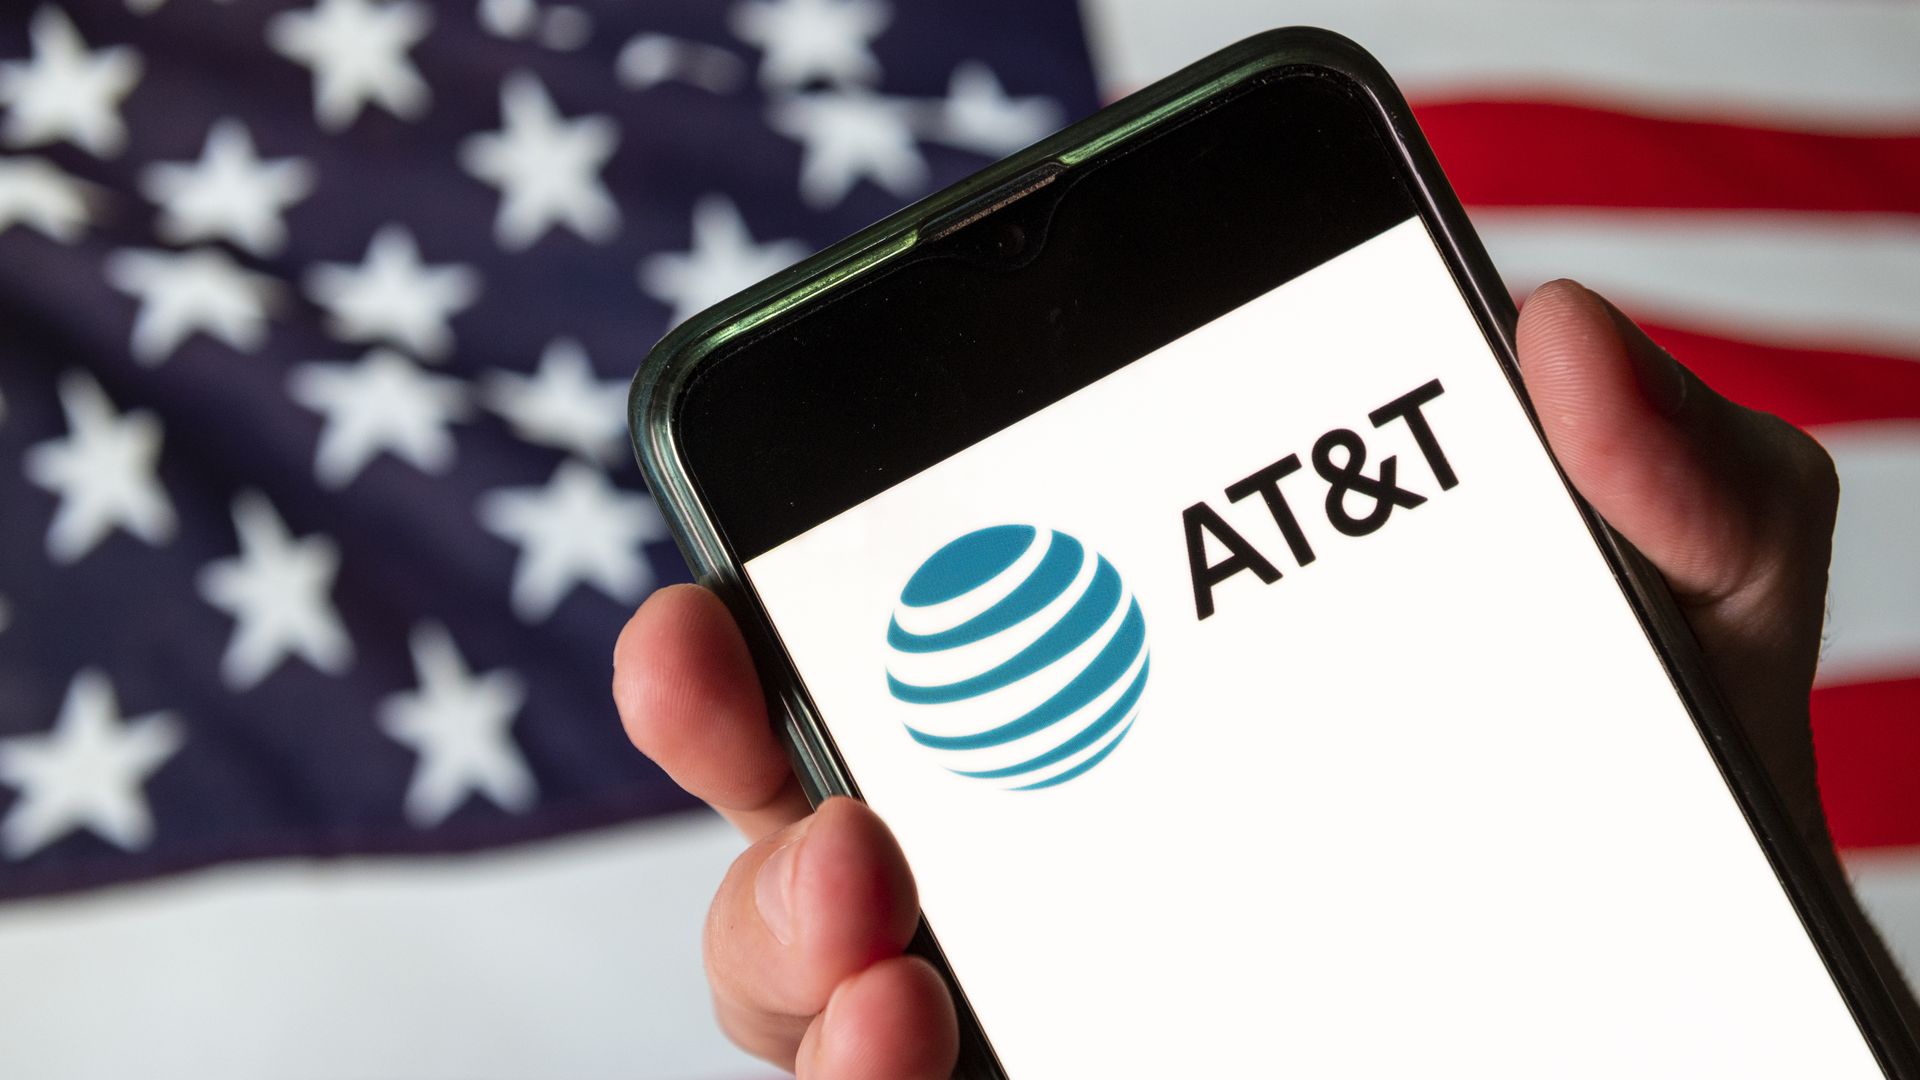 A phone displaying the AT&T logo appears in front of the American flag.